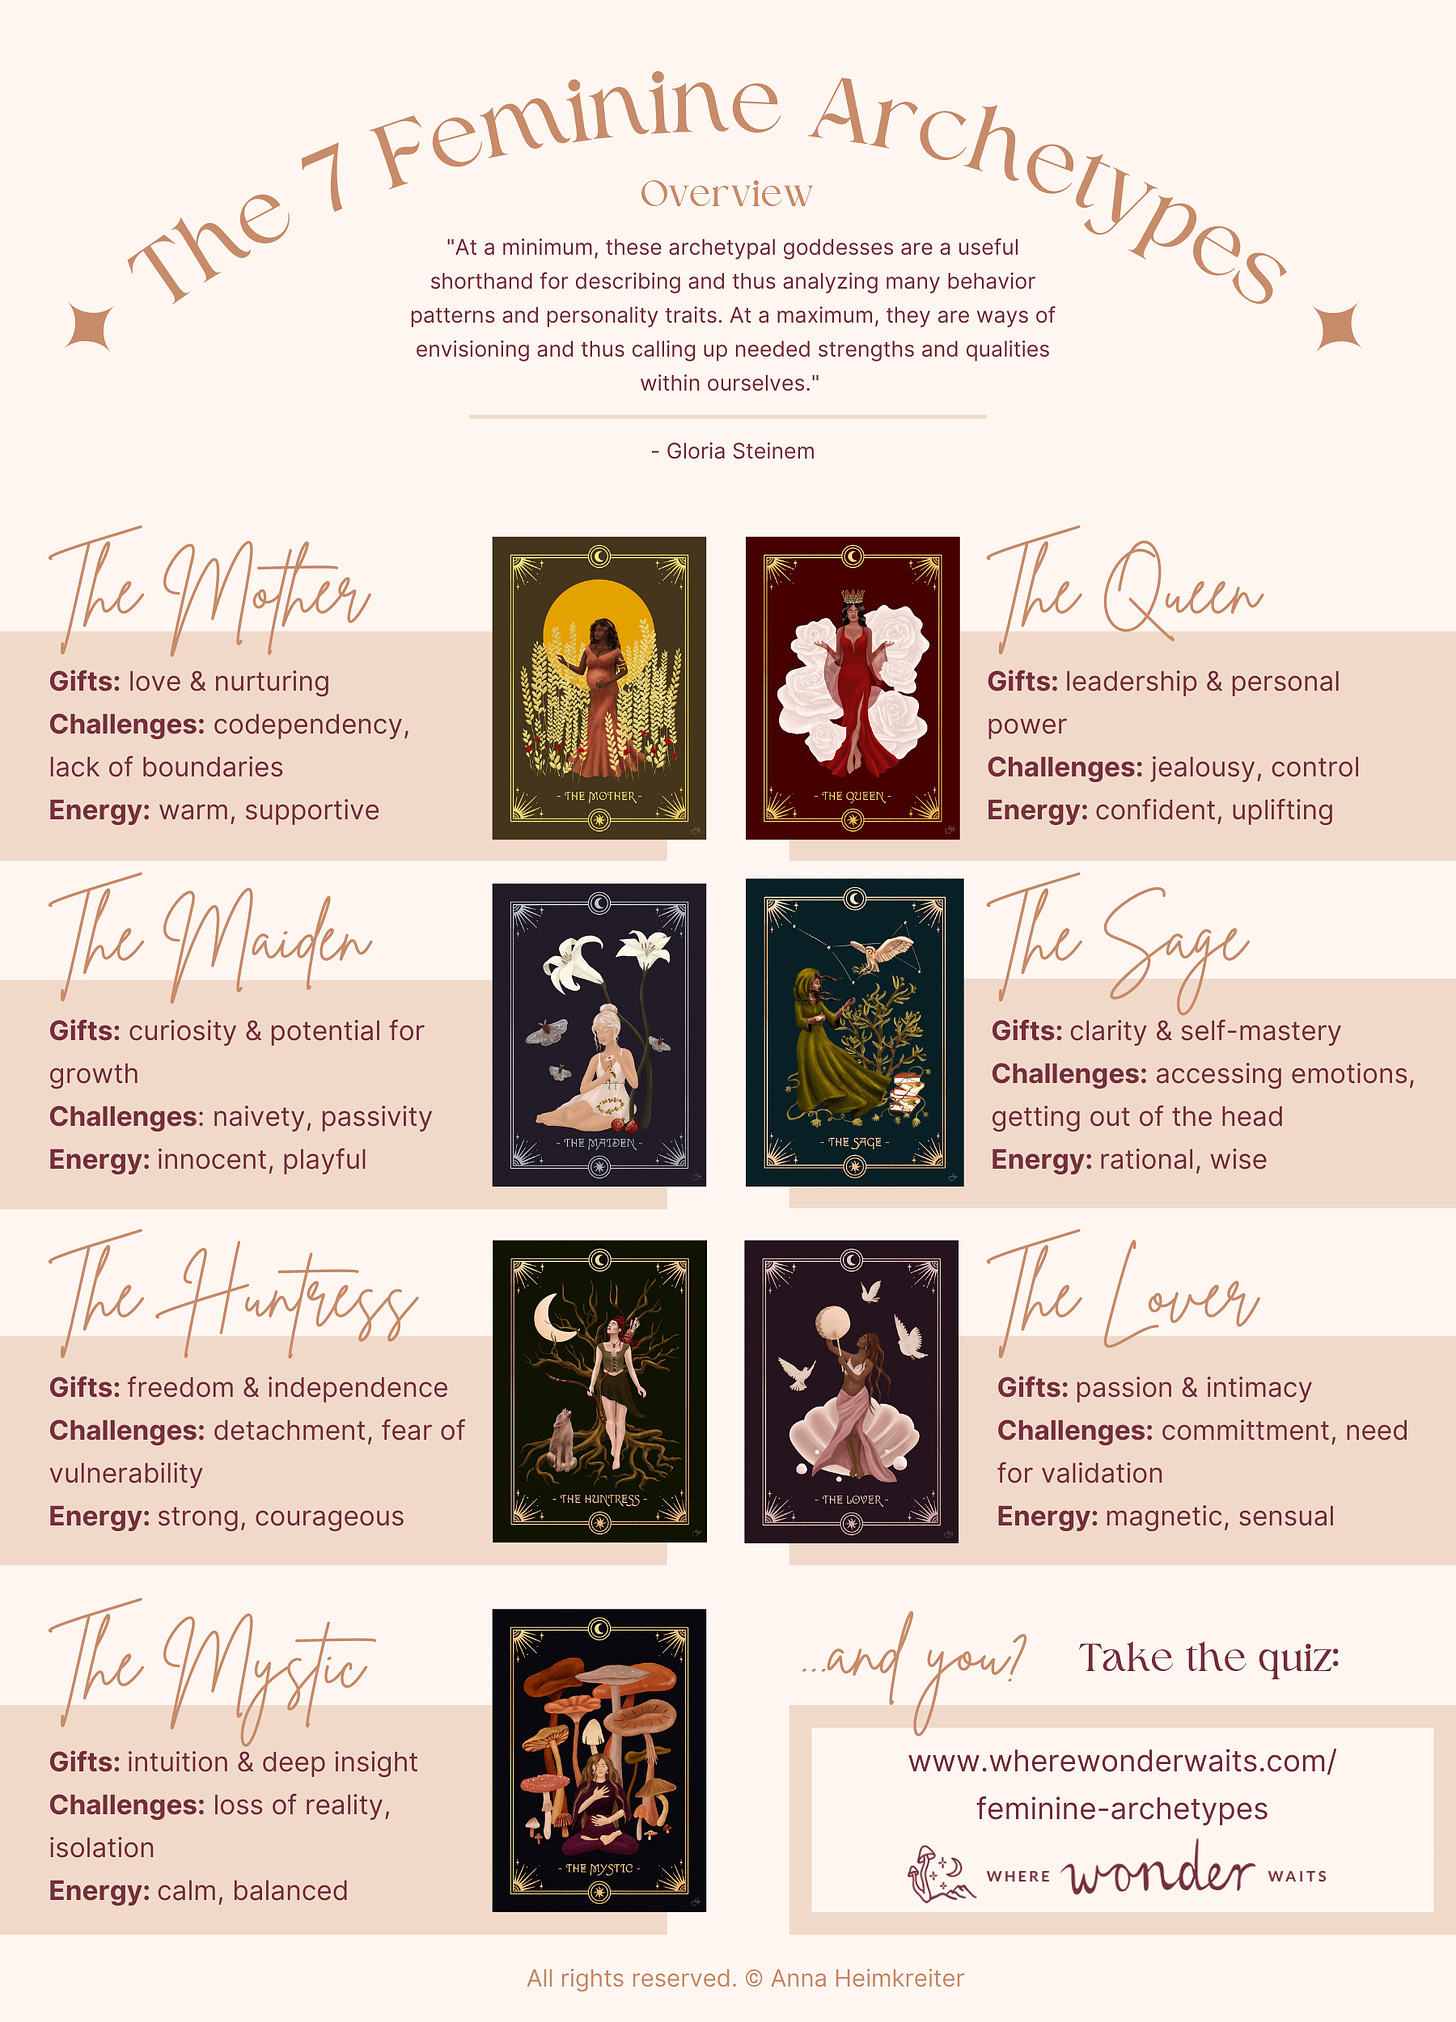 An overview of the 7 Feminine Archetypes, including their typical characteristics and challenges.